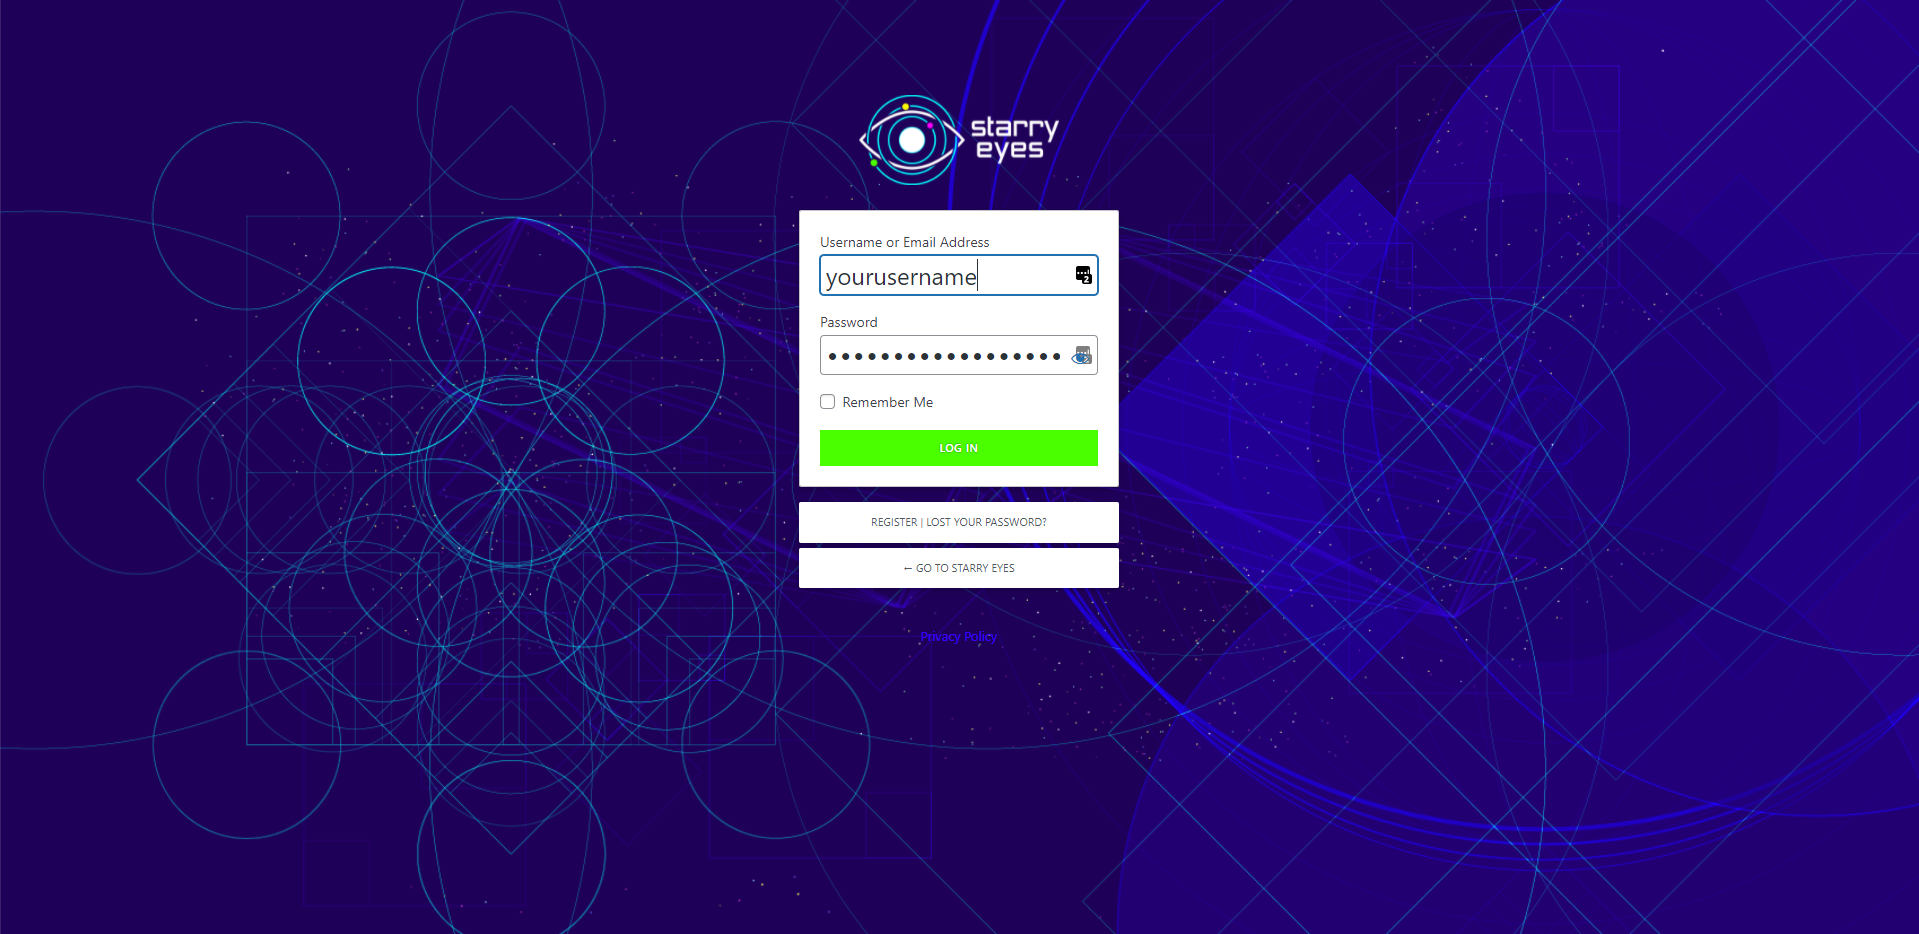 What the login page will look like.